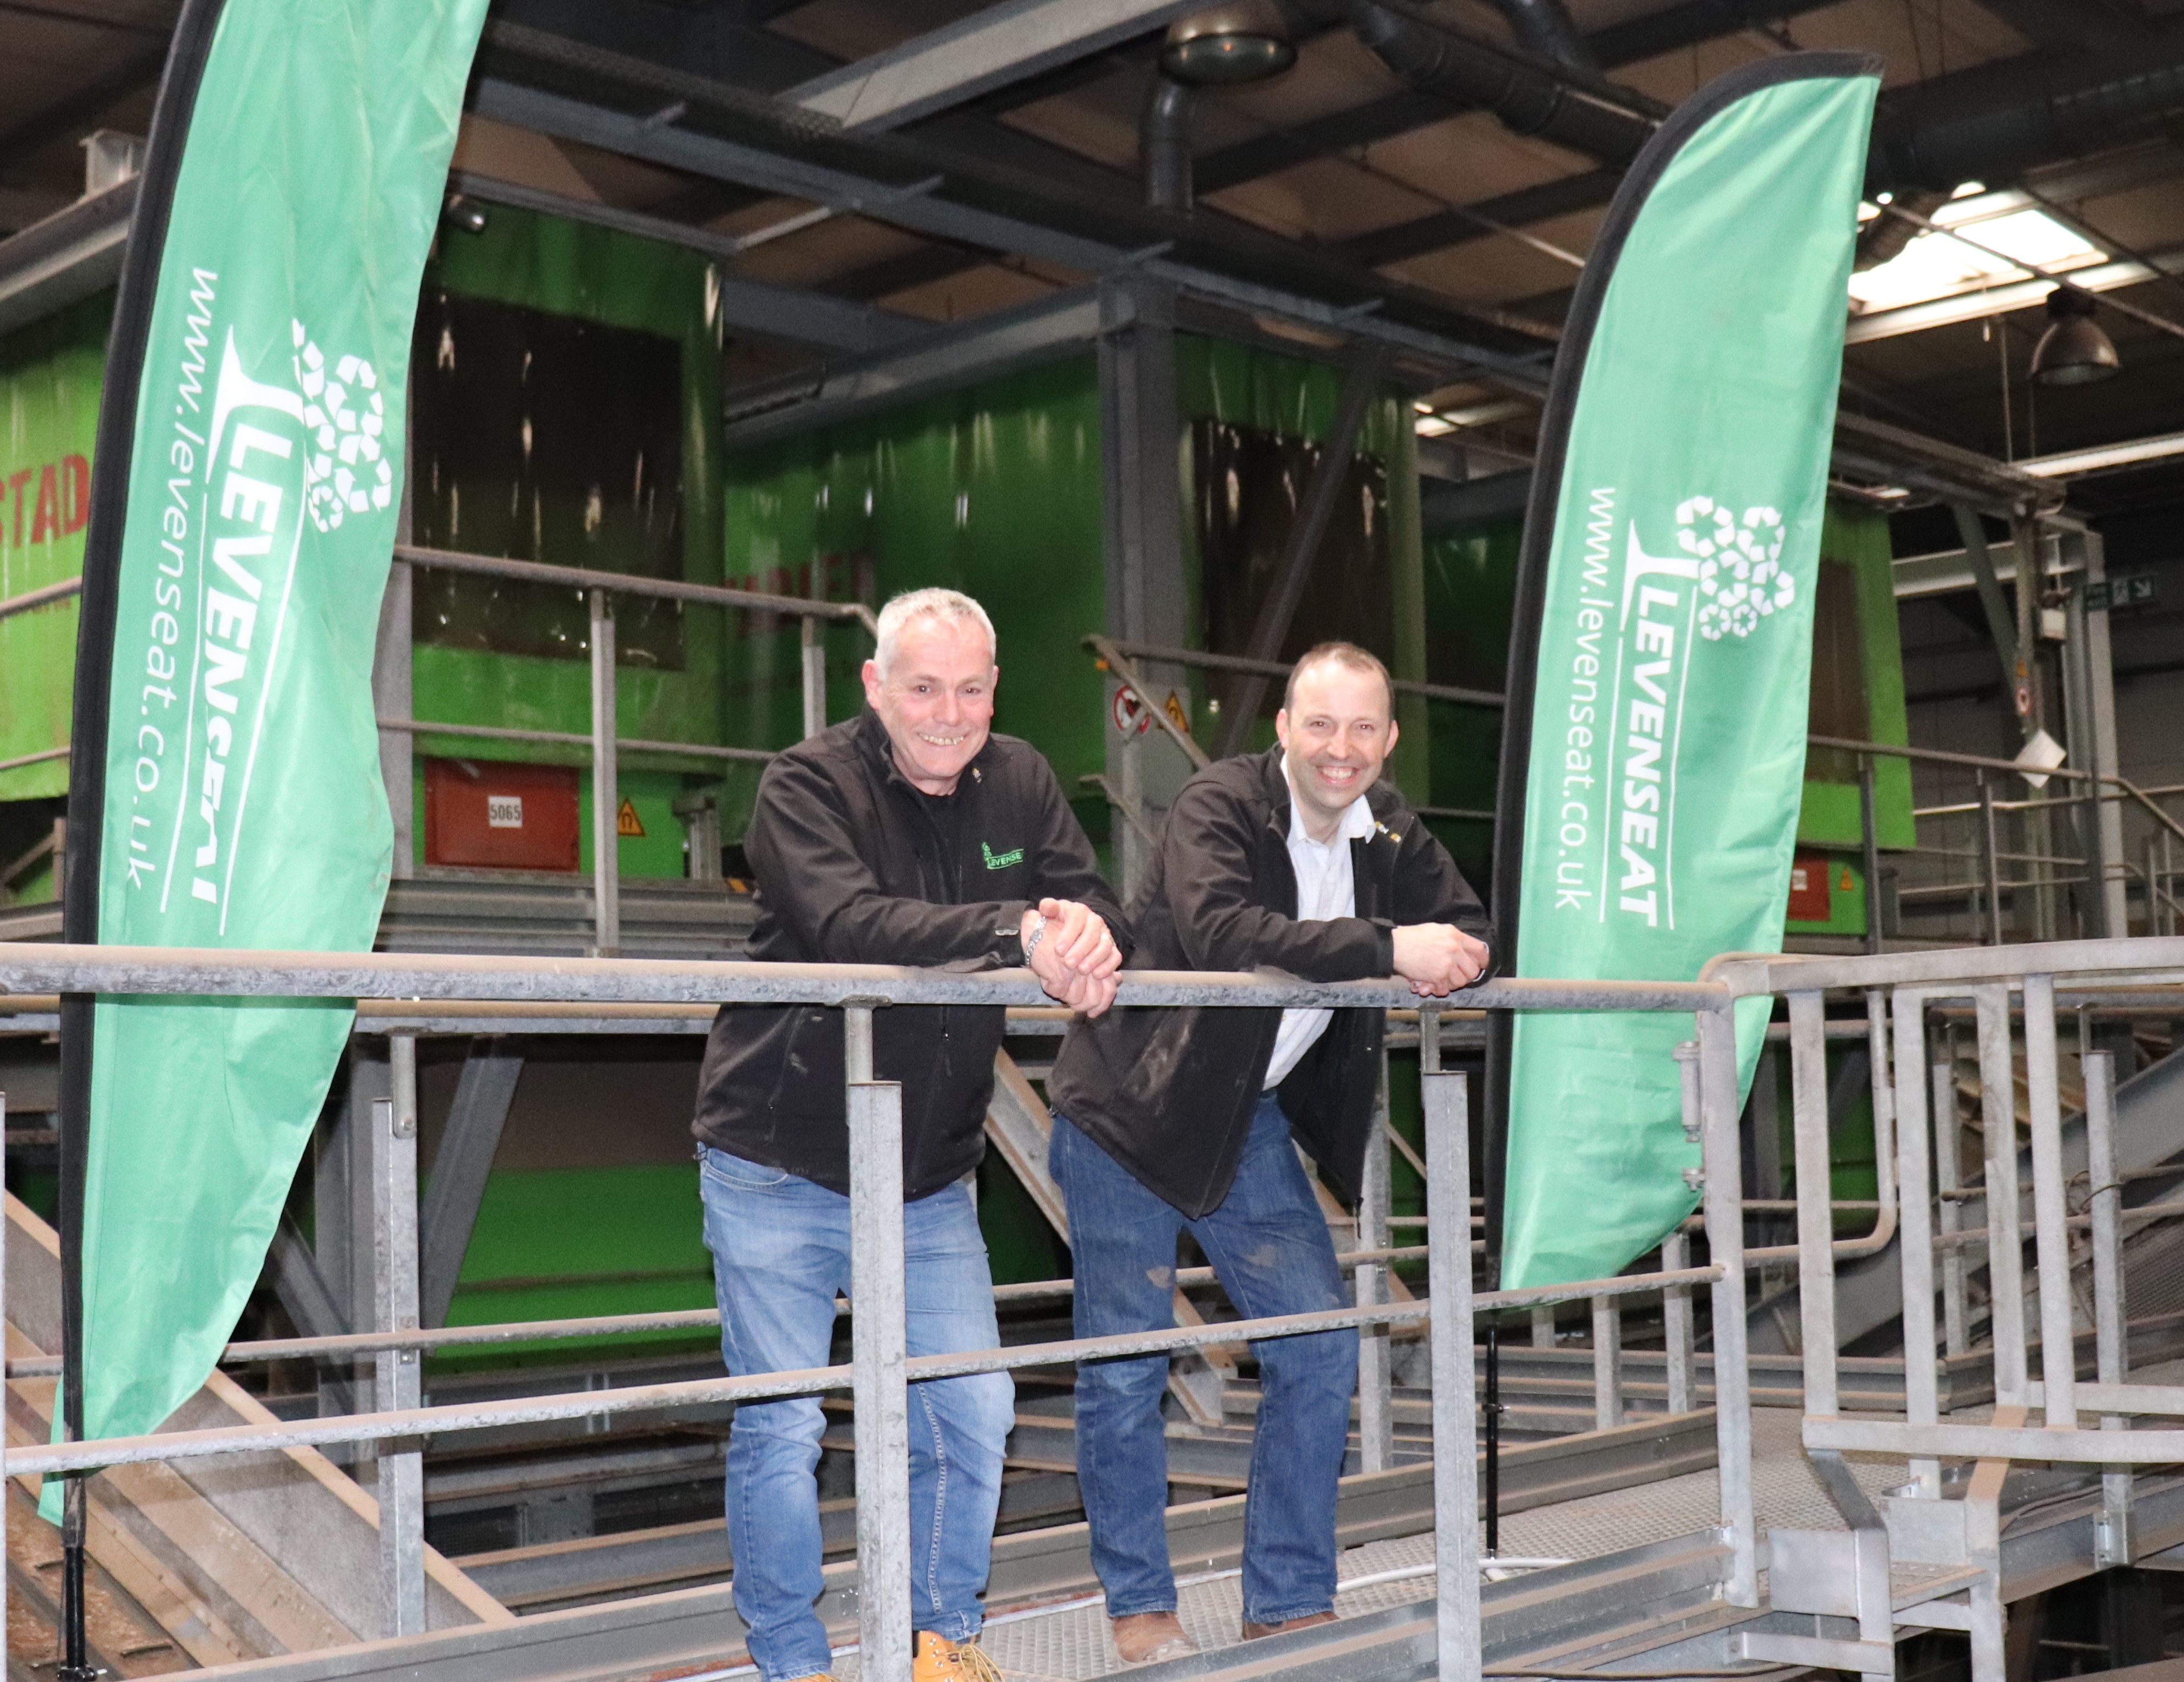 Levenseat to invest £4m to modernise newly acquired recycling facility